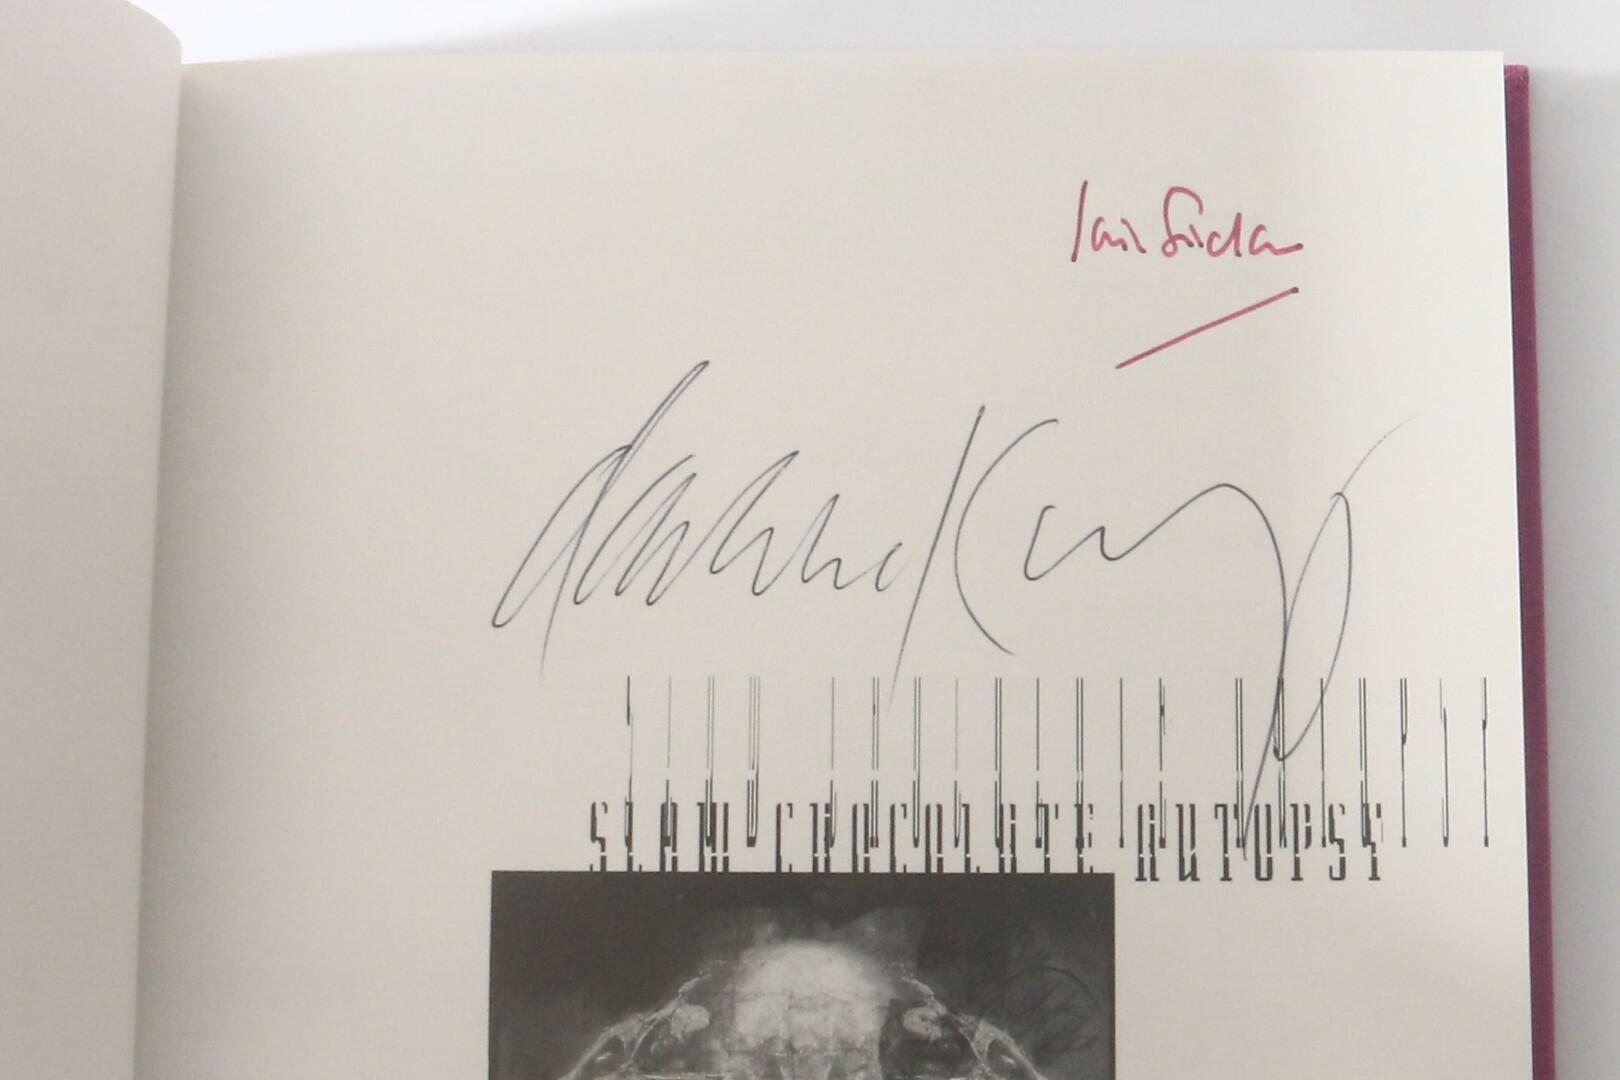 Iain Sinclair - Slow Chocolate Autopsy - Phoenix House, 1997, Signed Limited Edition.